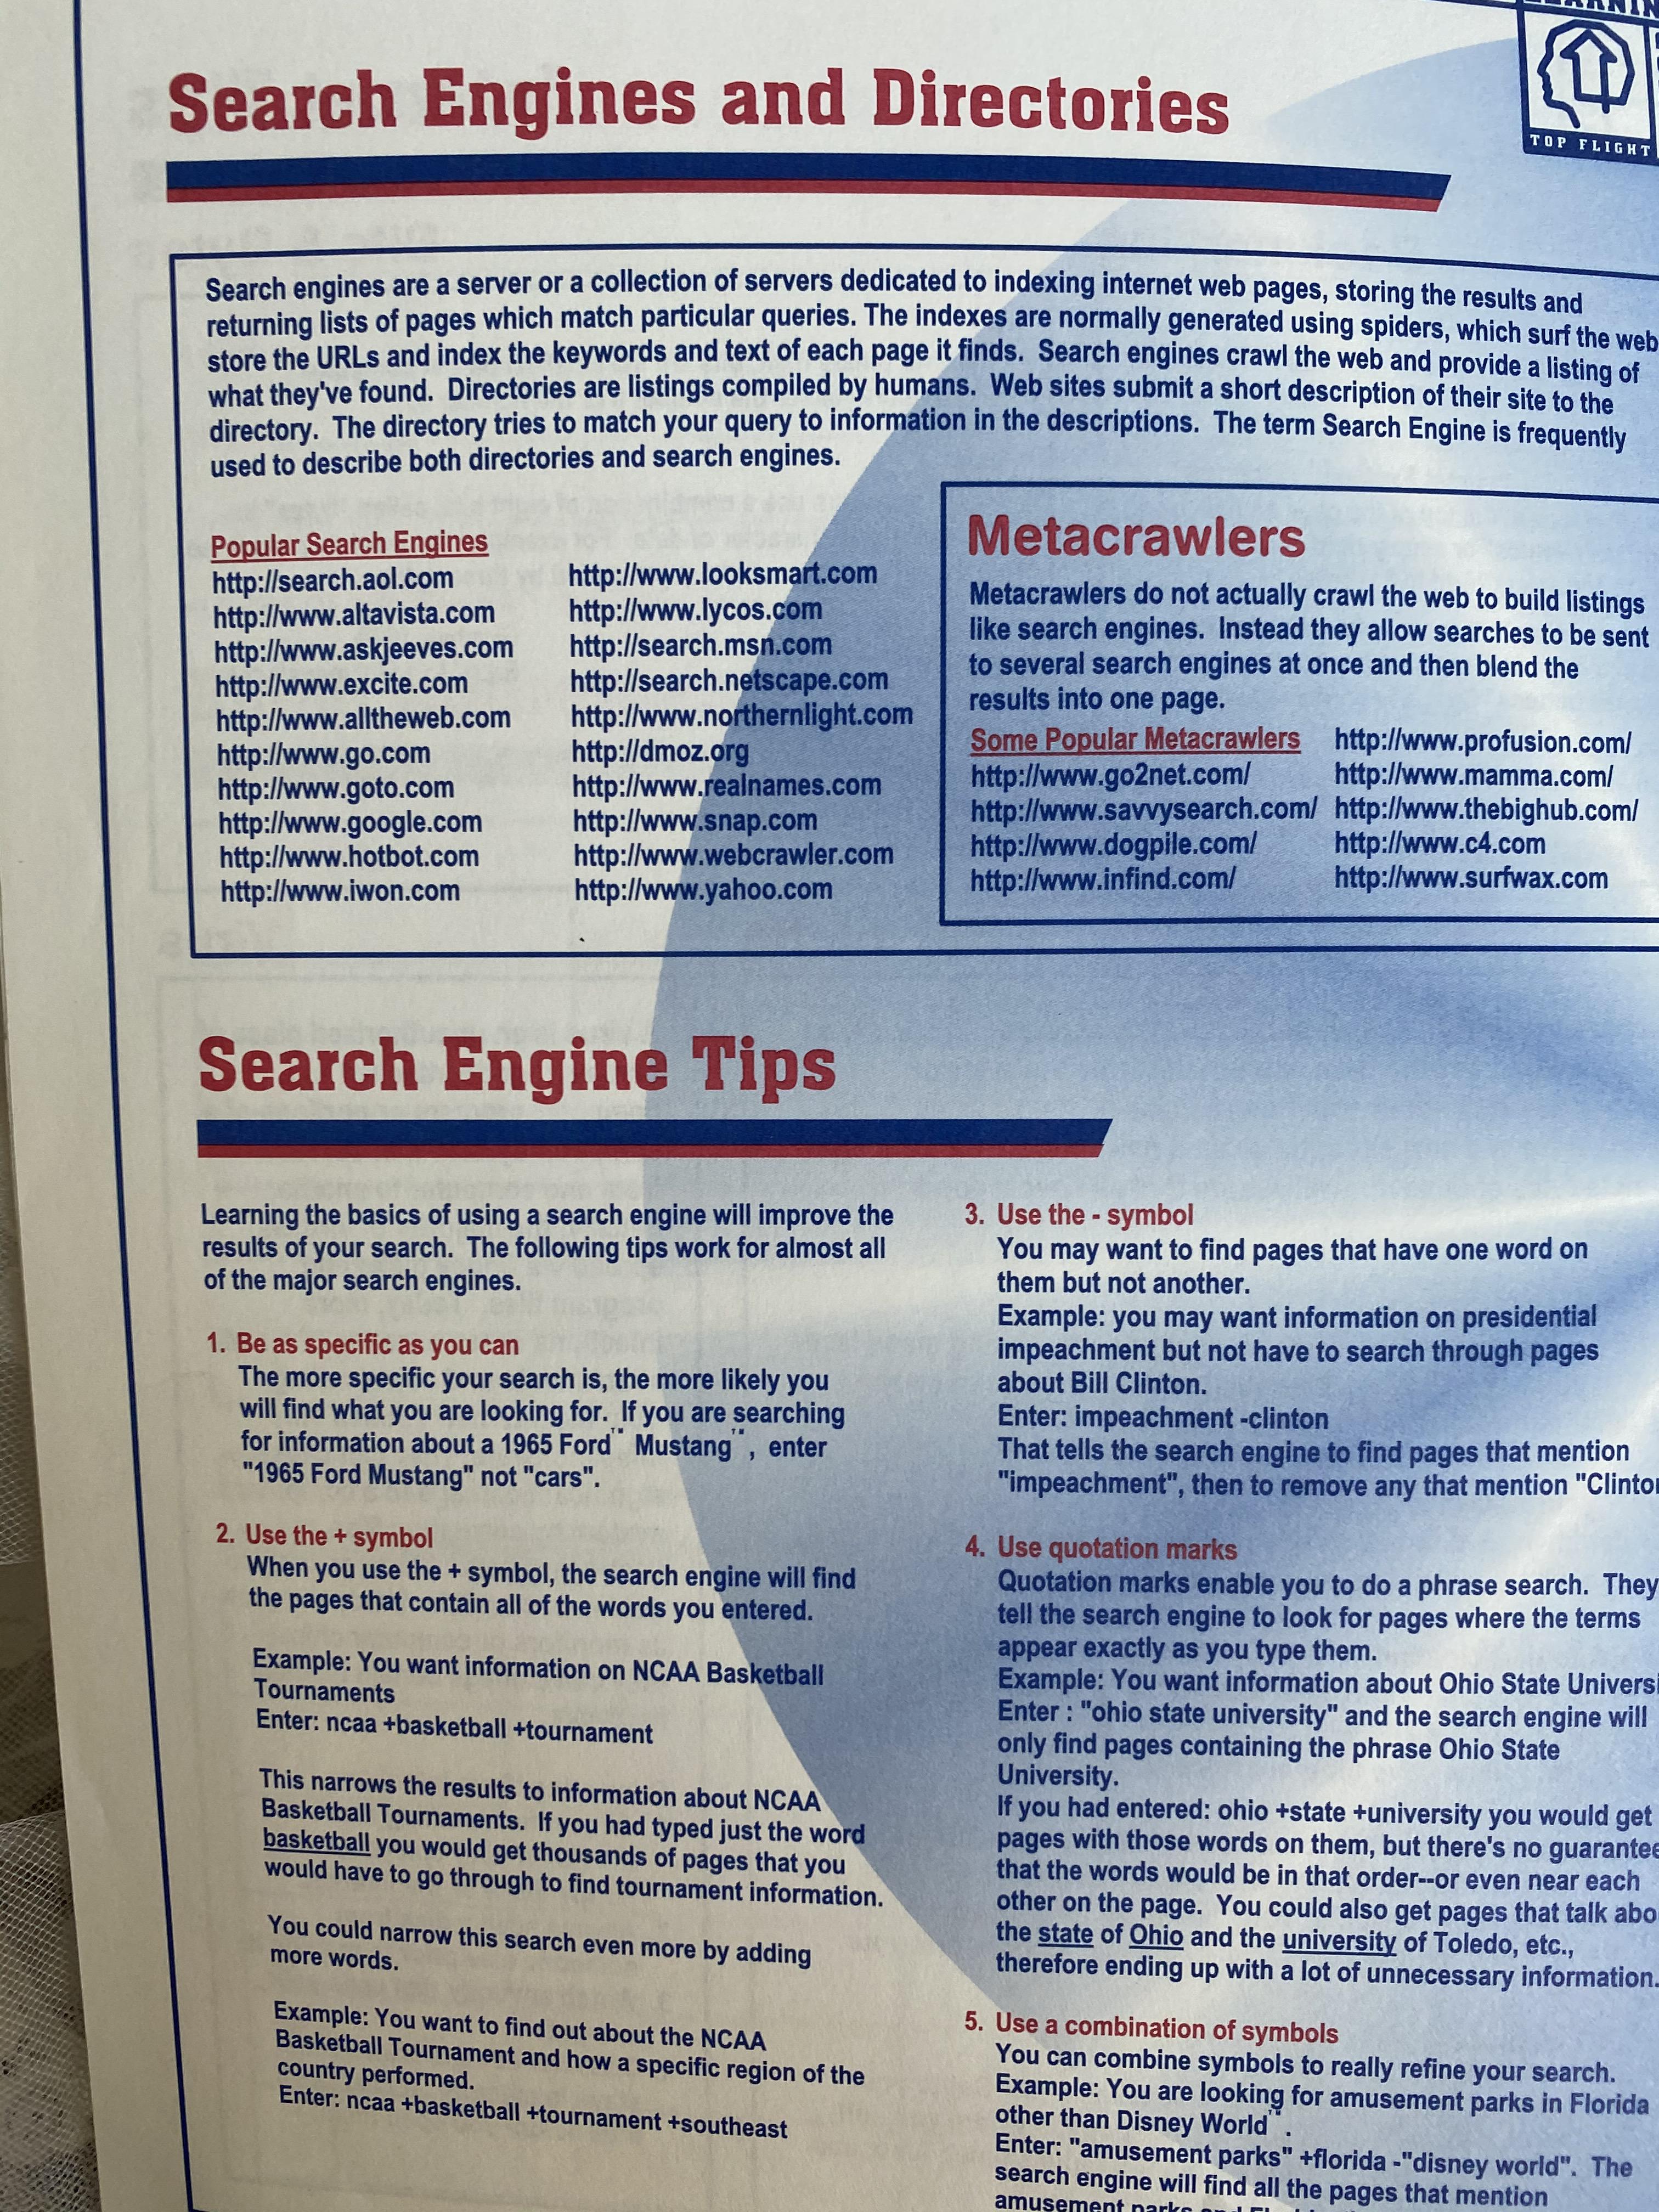 SEO from the year 2000! Bring back search index diversity, is what I always say...